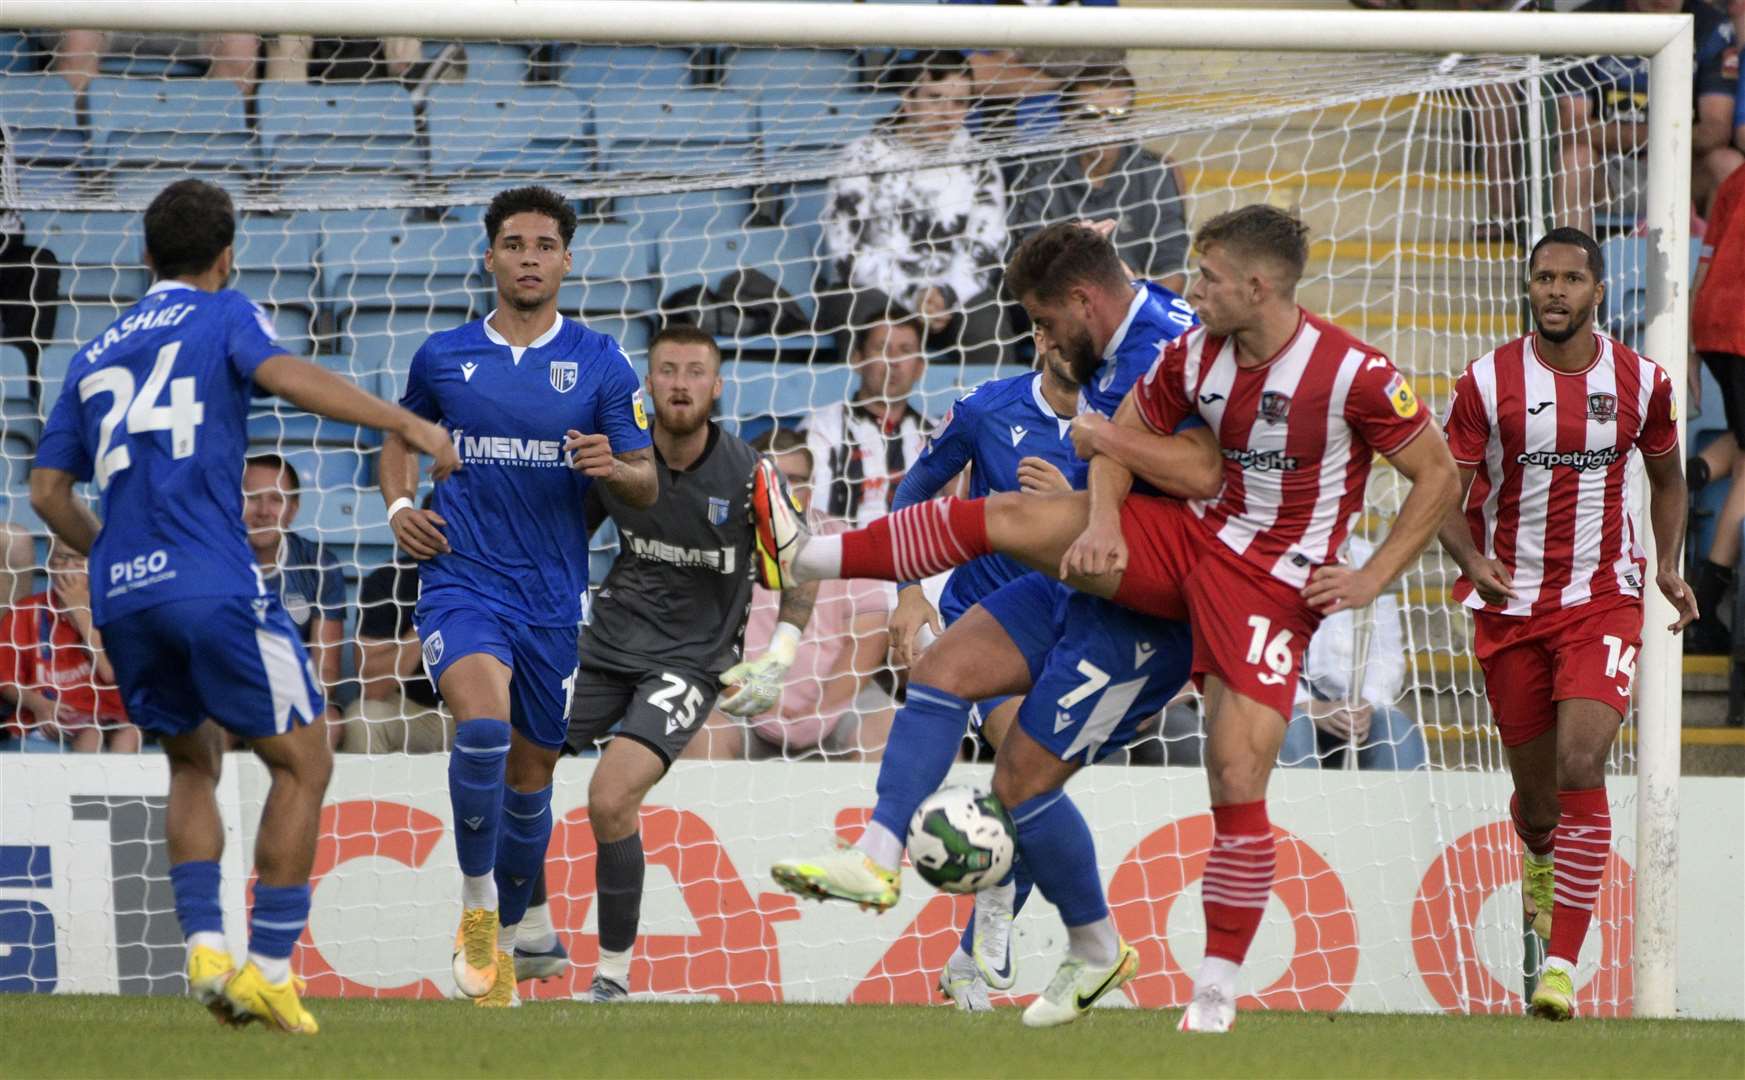 Gillingham's Alex MacDonald battles against Exeter on Tuesday night. Picture: Barry Goodwin